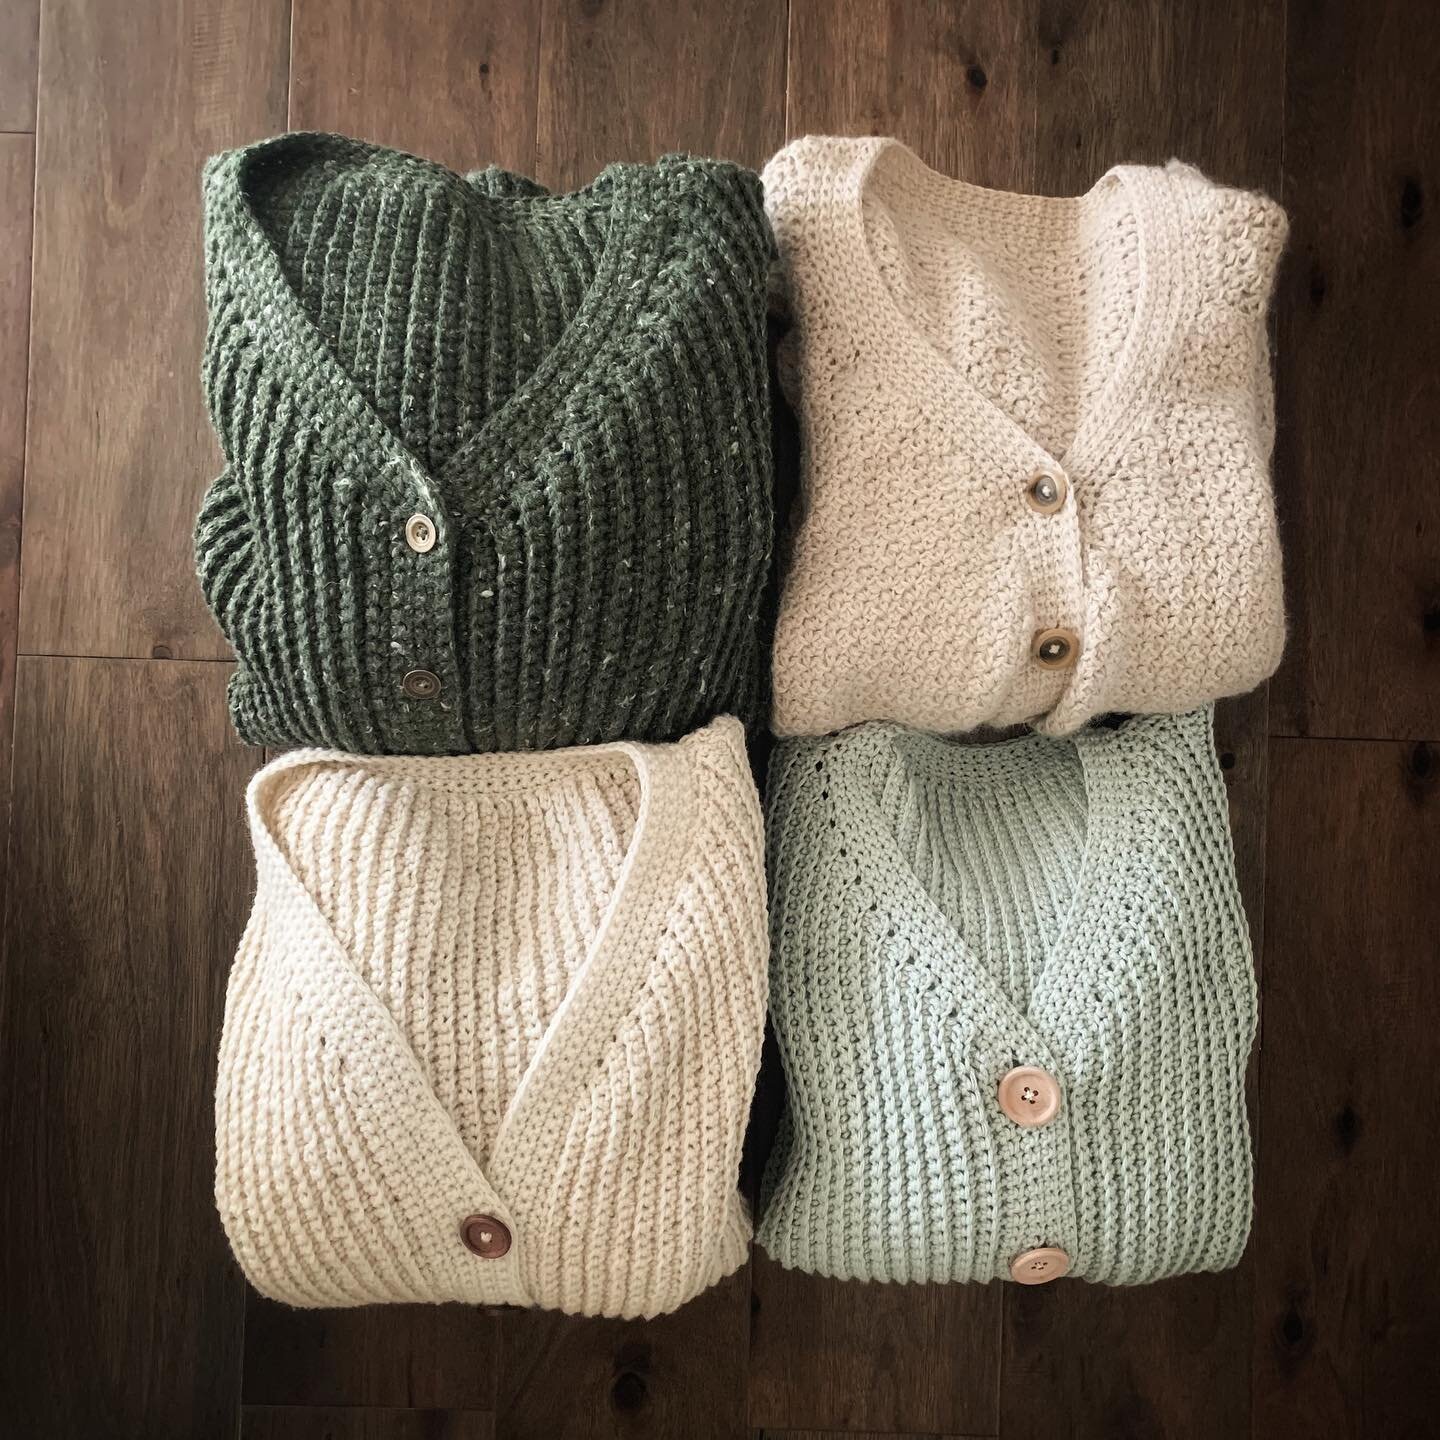 Can&rsquo;t stop making v-neck cardigans. Top right is the #herbaceouscardy , the rest are samples of a new cardigan that I can&rsquo;t stop making! I&rsquo;m sampling it in several sizes and fibers to perfect the fit and provide lots of information 